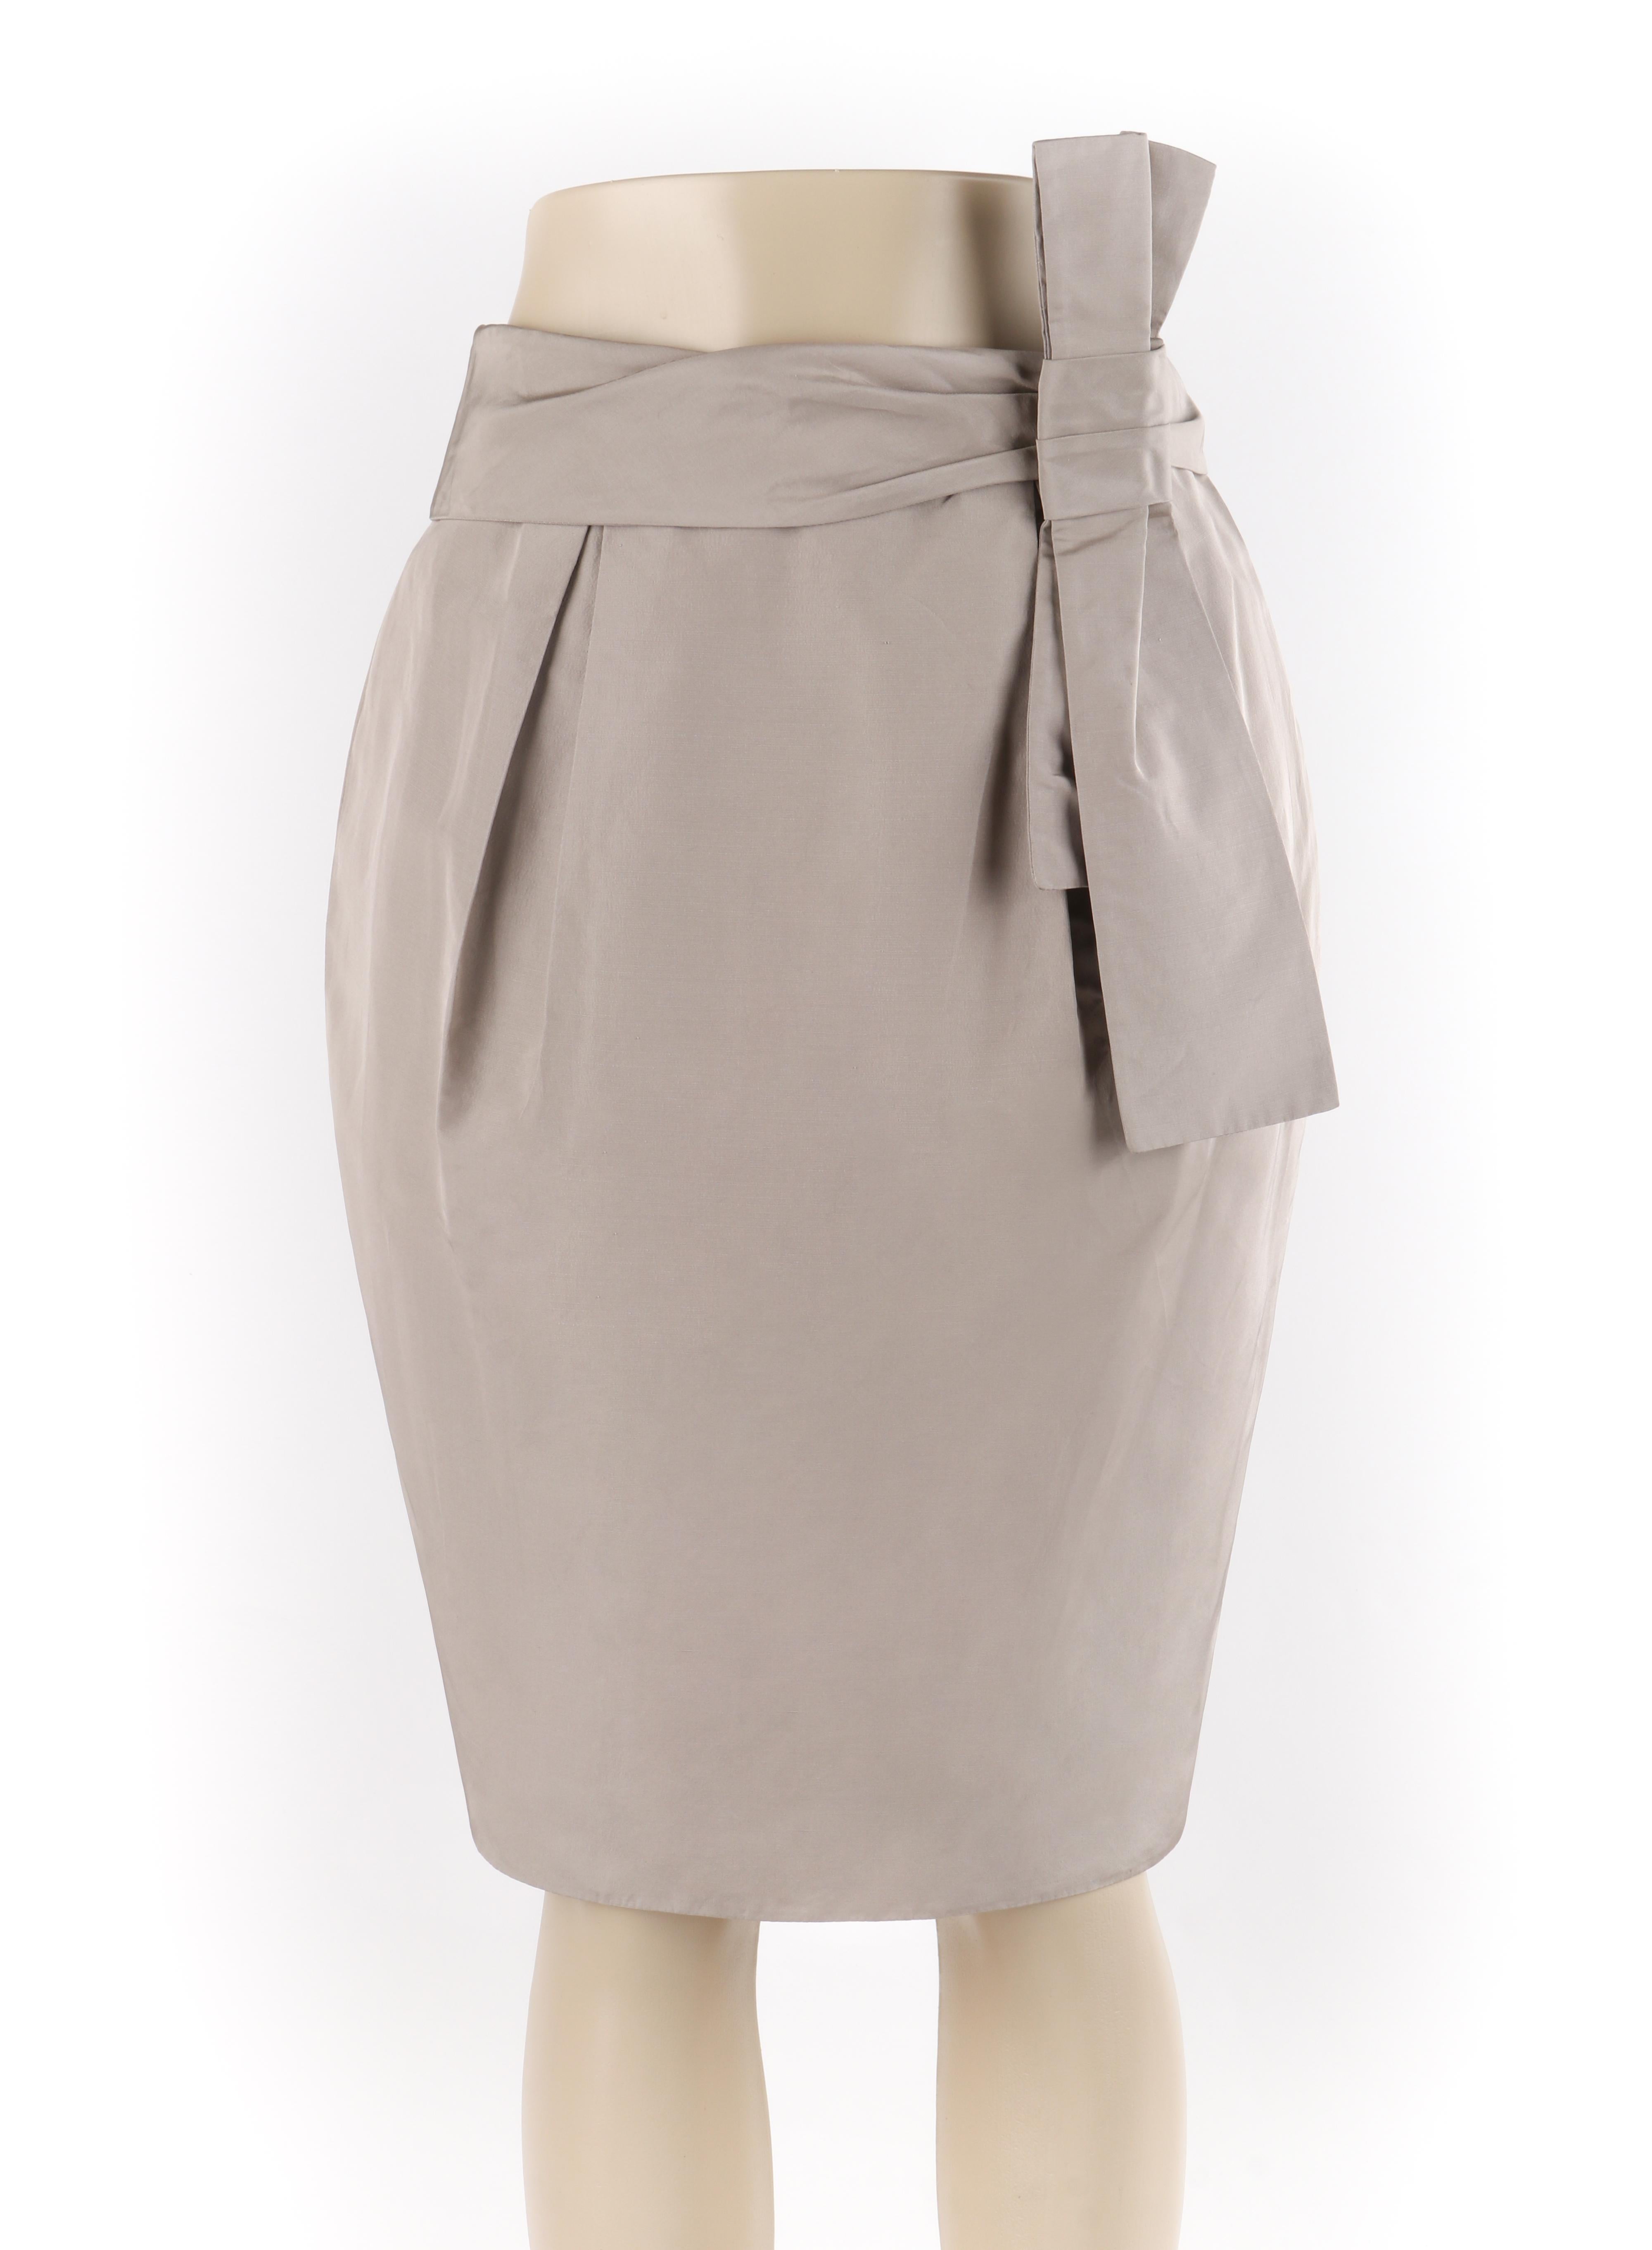 ALEXANDER McQUEEN S/S 2006 Taupe Silk Taffeta Pleated Waist Bow Pencil Skirt 
 
Brand / Manufacturer: Alexander McQueen 
Collection: S/S 2006 
Style: Pencil Skirt
Color(s): Shades if taupe
Lined: Yes
Marked Fabric Content: 100% seta silk 
Additional